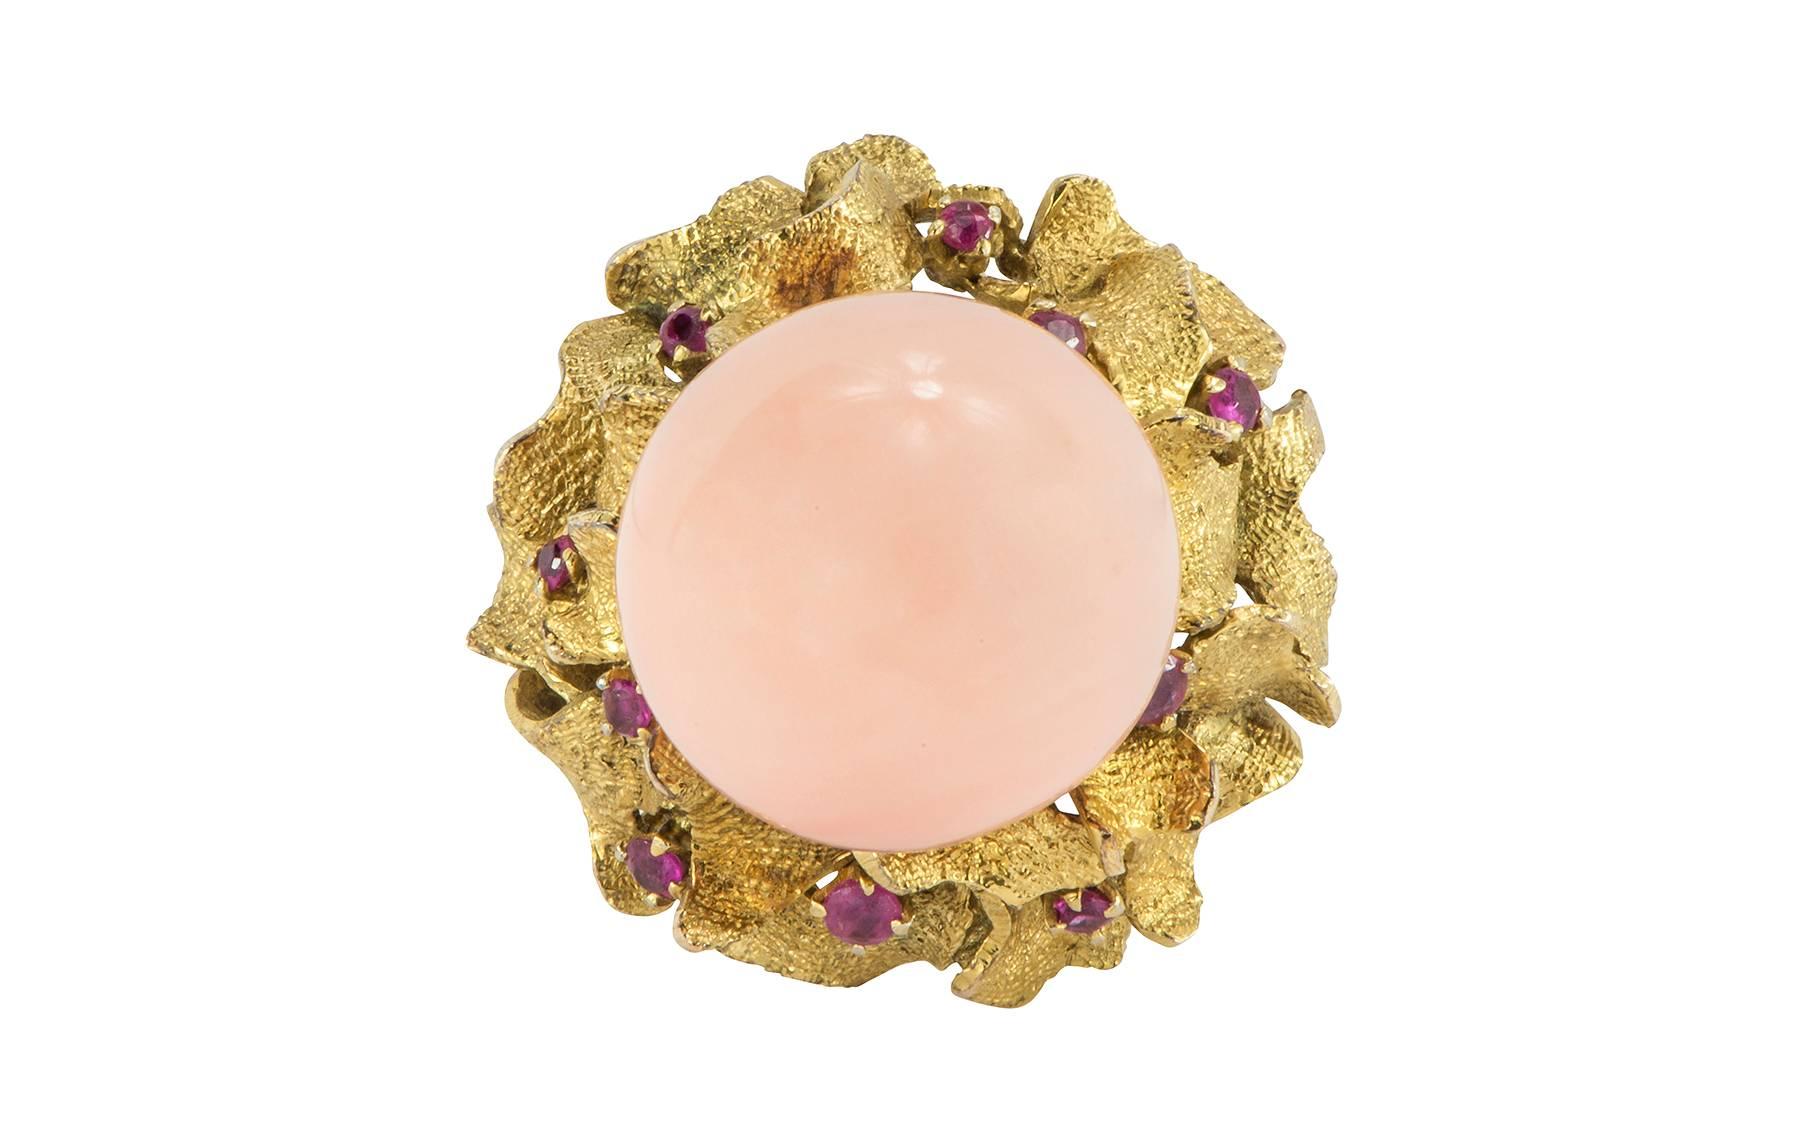 A round angel skin coral  and ruby 14k yellow gold ring.  The 13.80mm coral is set on a post with textured waves of gold and rubies surrounding.  

Hallmark:  14K
Currently a size:  7.00